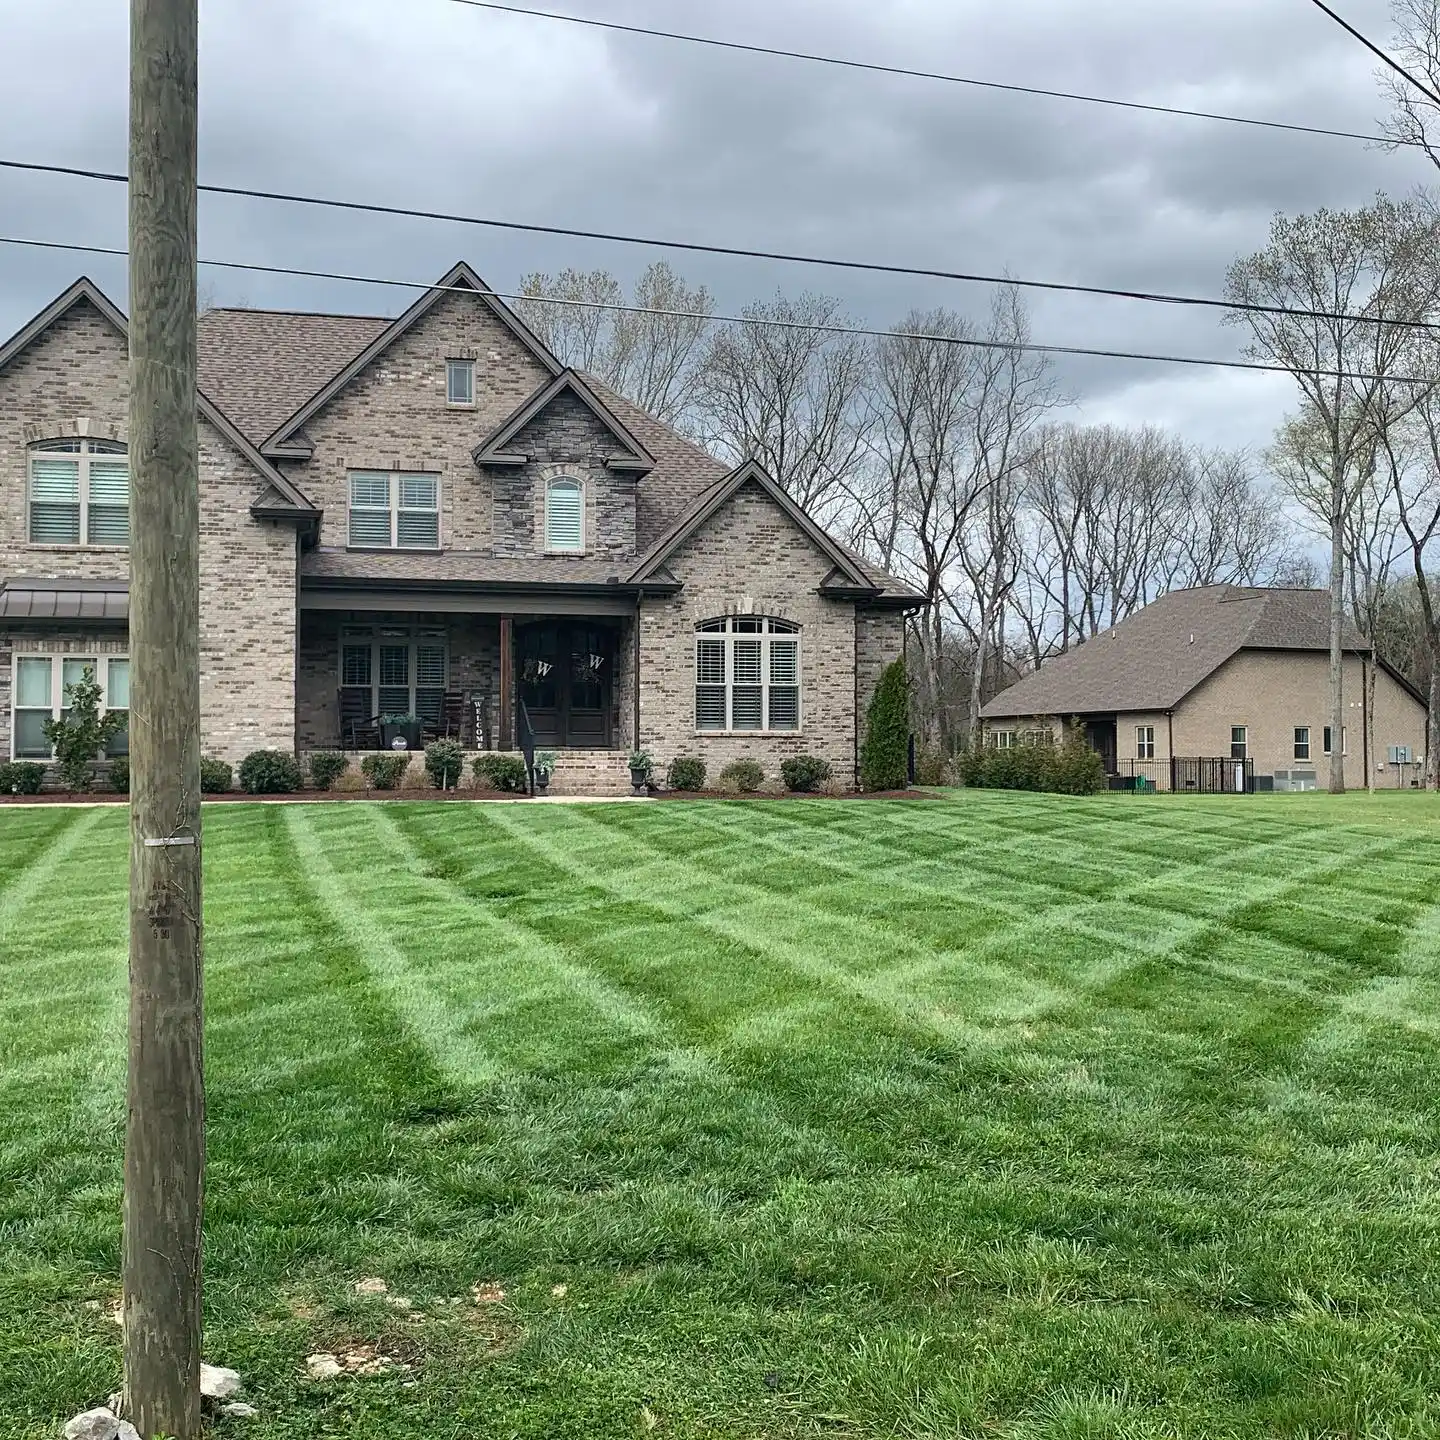 Lawn Aeration & Overseeding for The Right Price Right Choice Lawn Care Services in Murfreesboro, TN